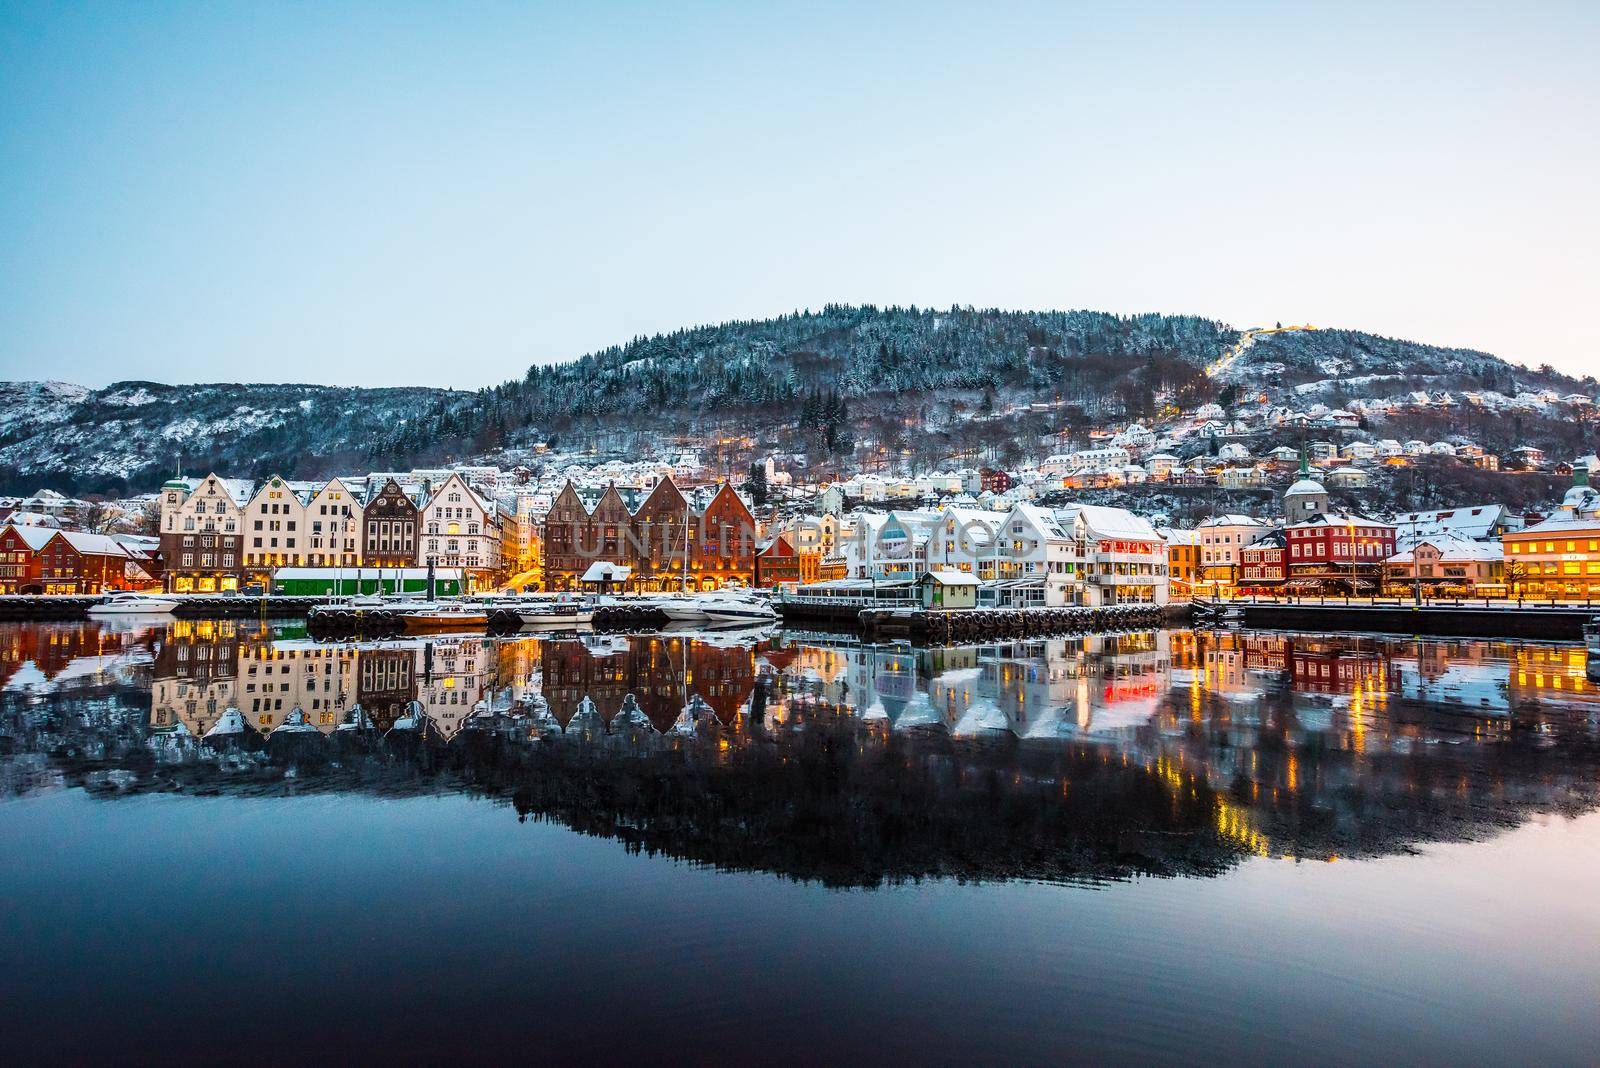 Bergen, Norway - December 27, 2014: Famous Bryggen street with wooden colored houses in Bergen at Christmas, Norway